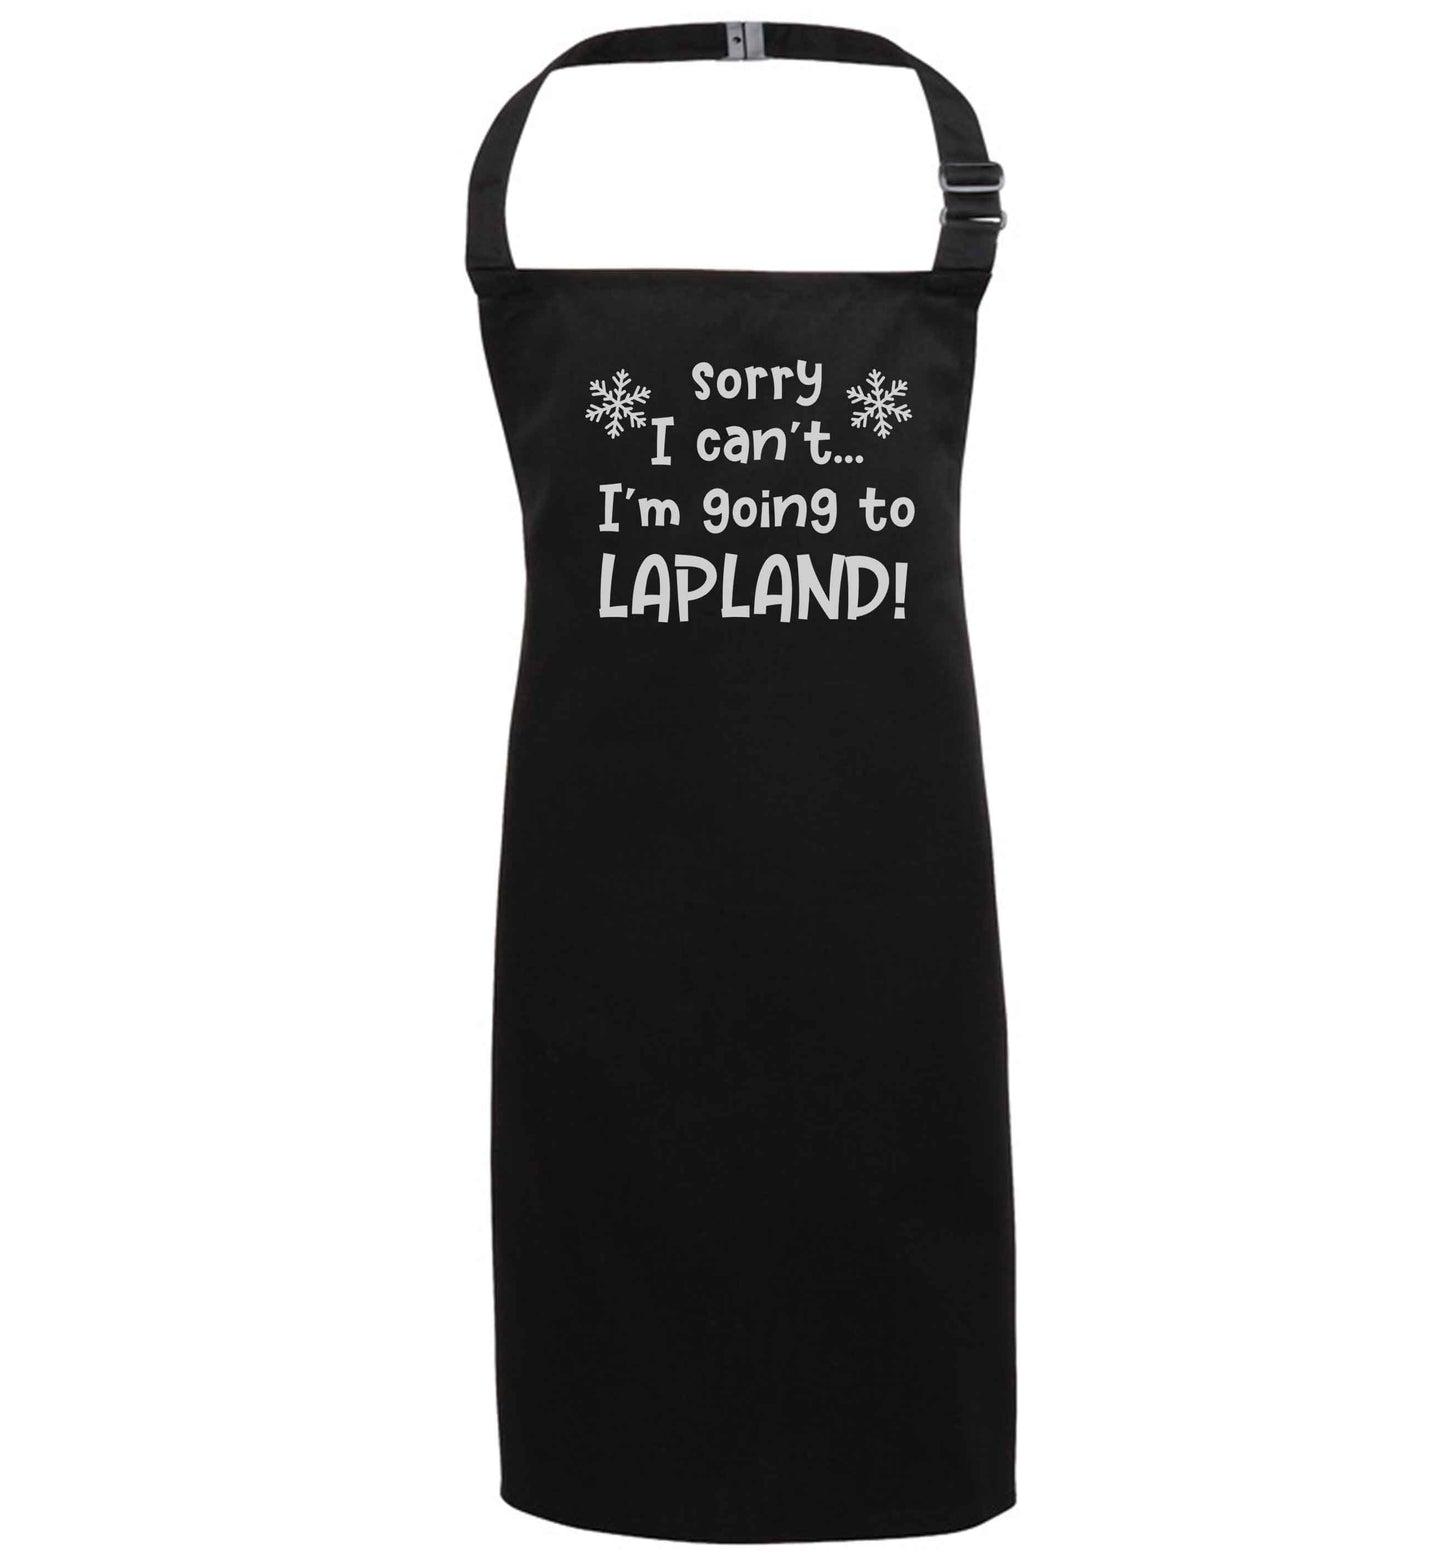 Sorry I can't I'm going to Lapland black apron 7-10 years